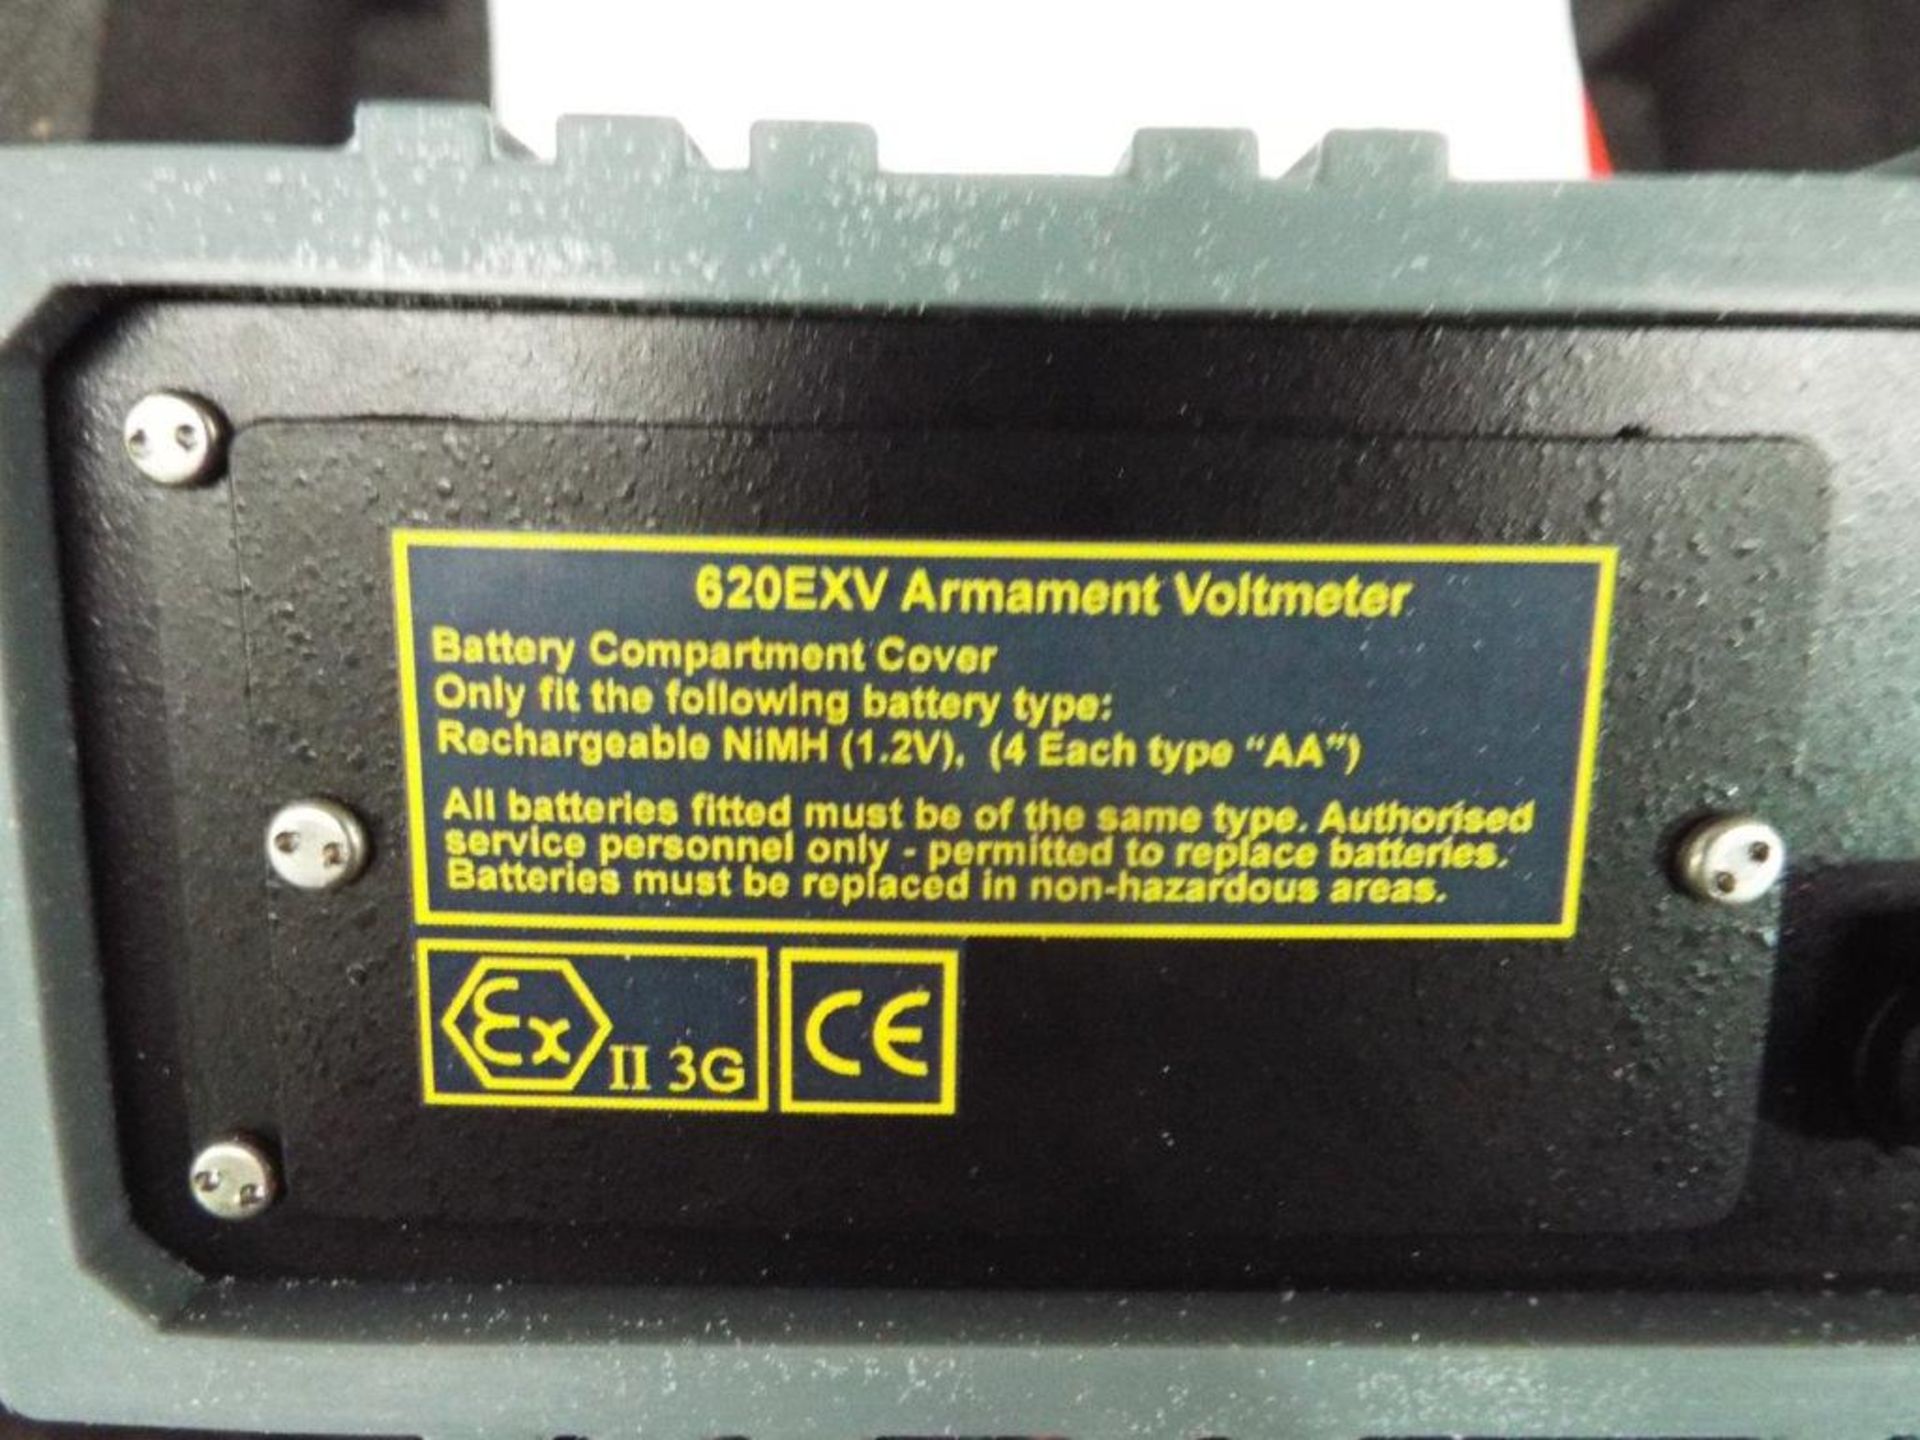 Amptec Research 620EXV Explosive Safety Armament Voltage Tester - Image 6 of 14